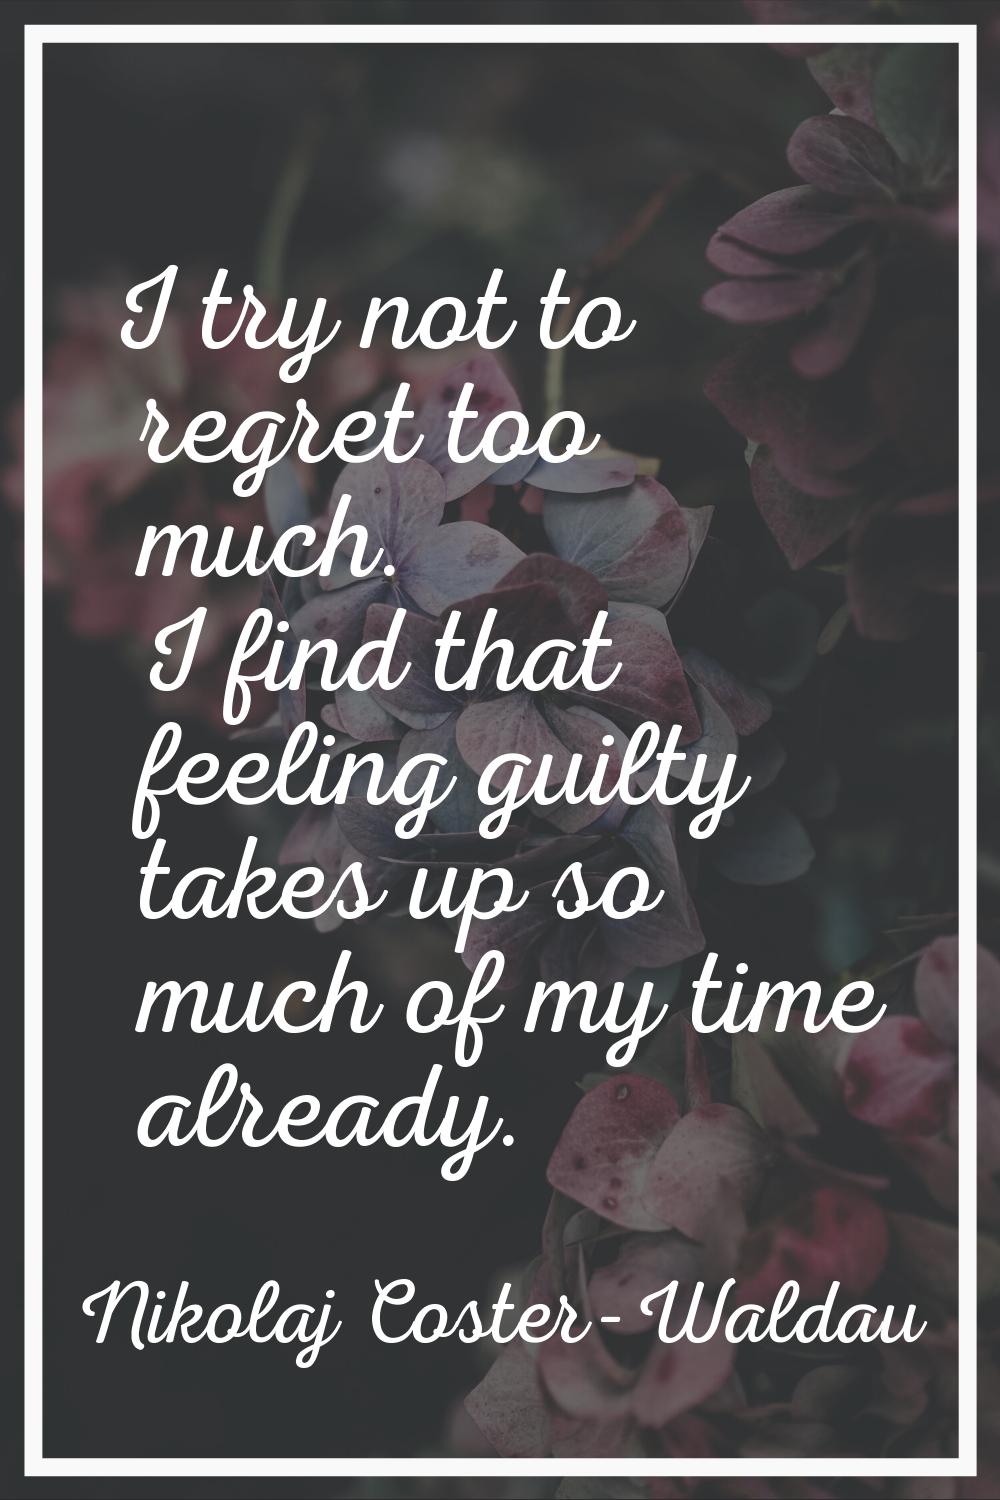 I try not to regret too much. I find that feeling guilty takes up so much of my time already.